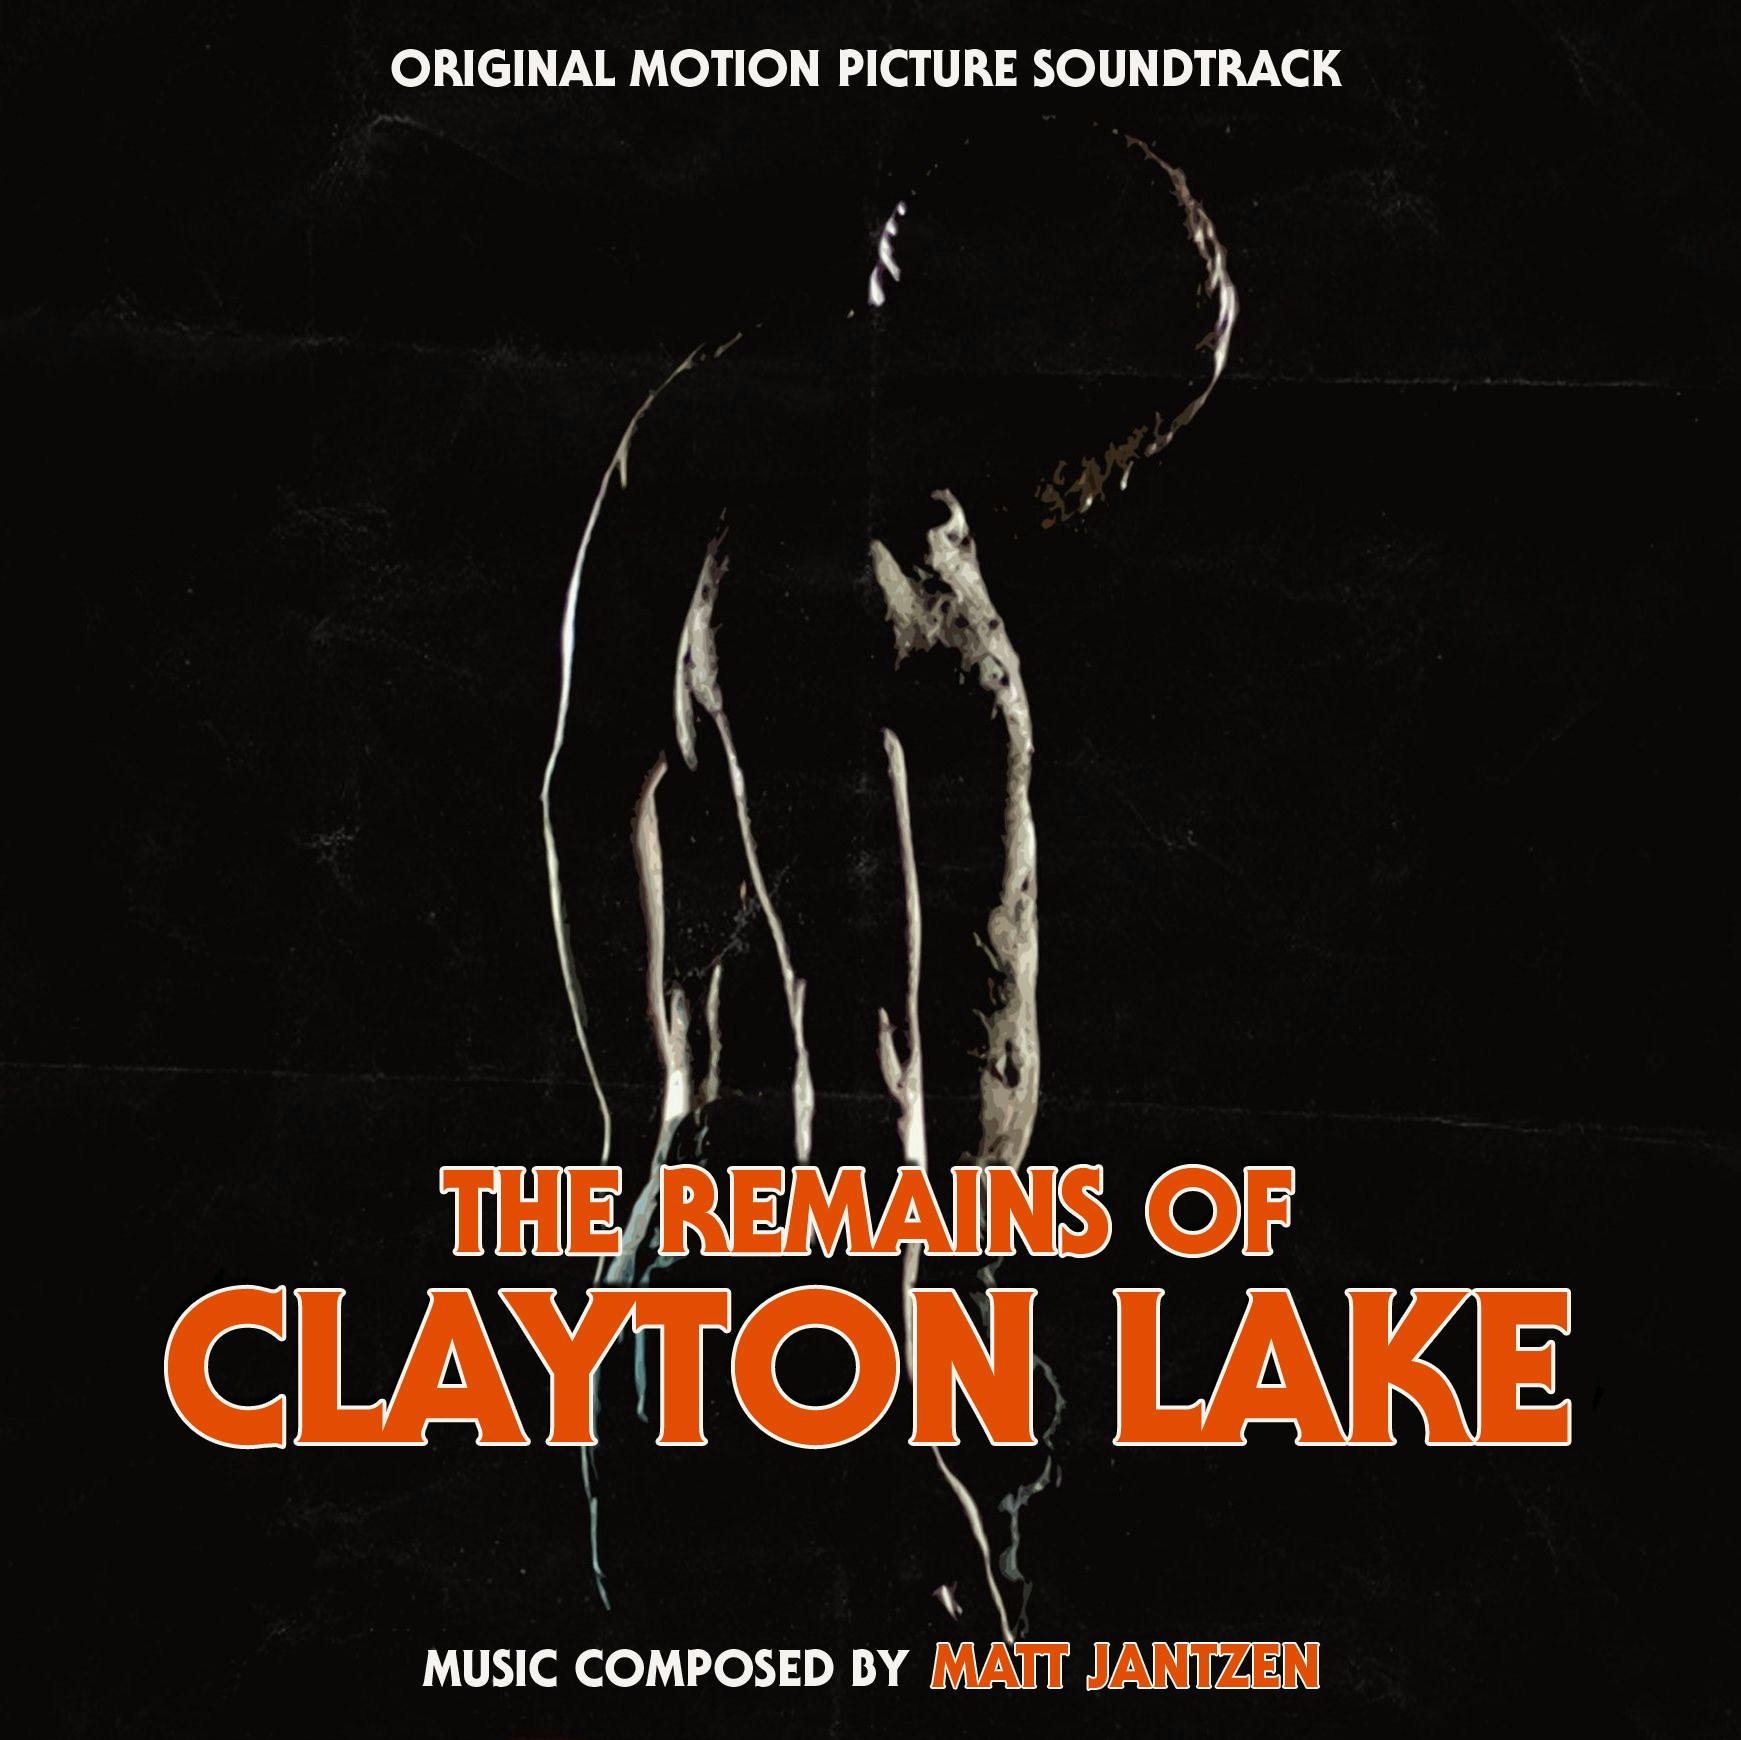 the-remains-of-clayton-lake poster goldposter com 2